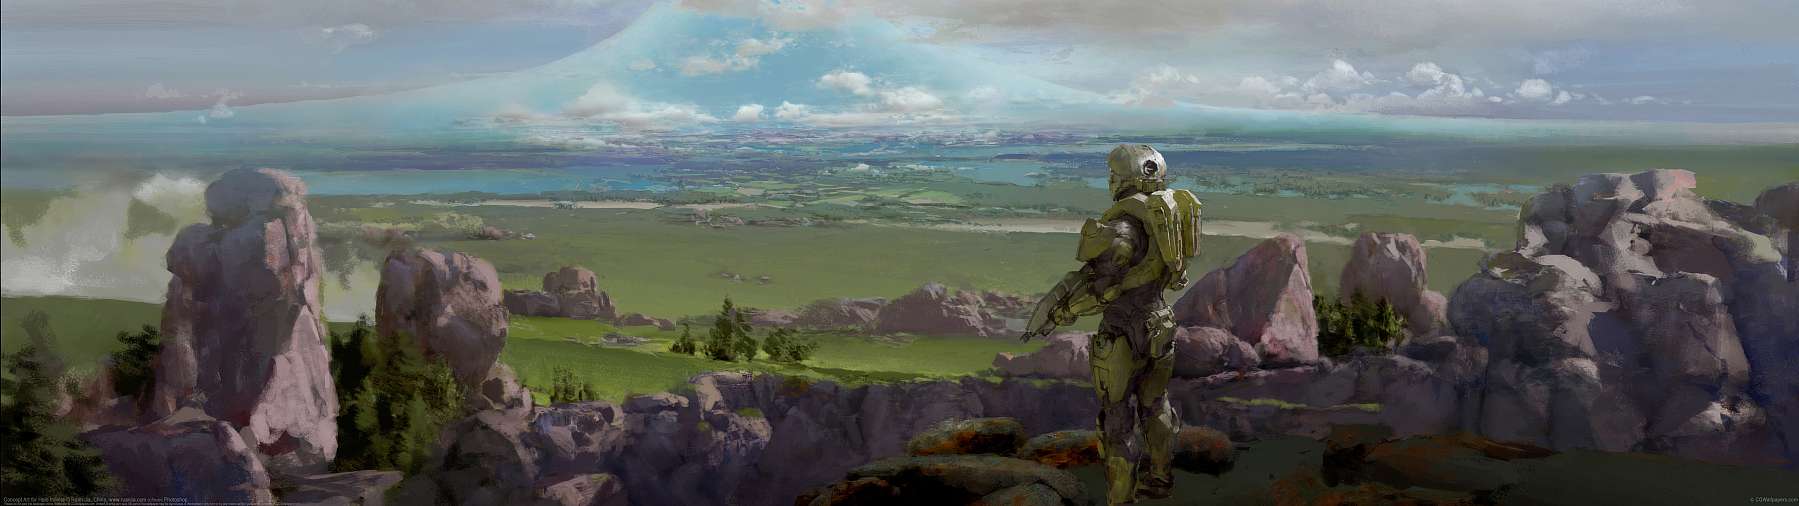 Concept Art for Halo Infinite ultrawide achtergrond